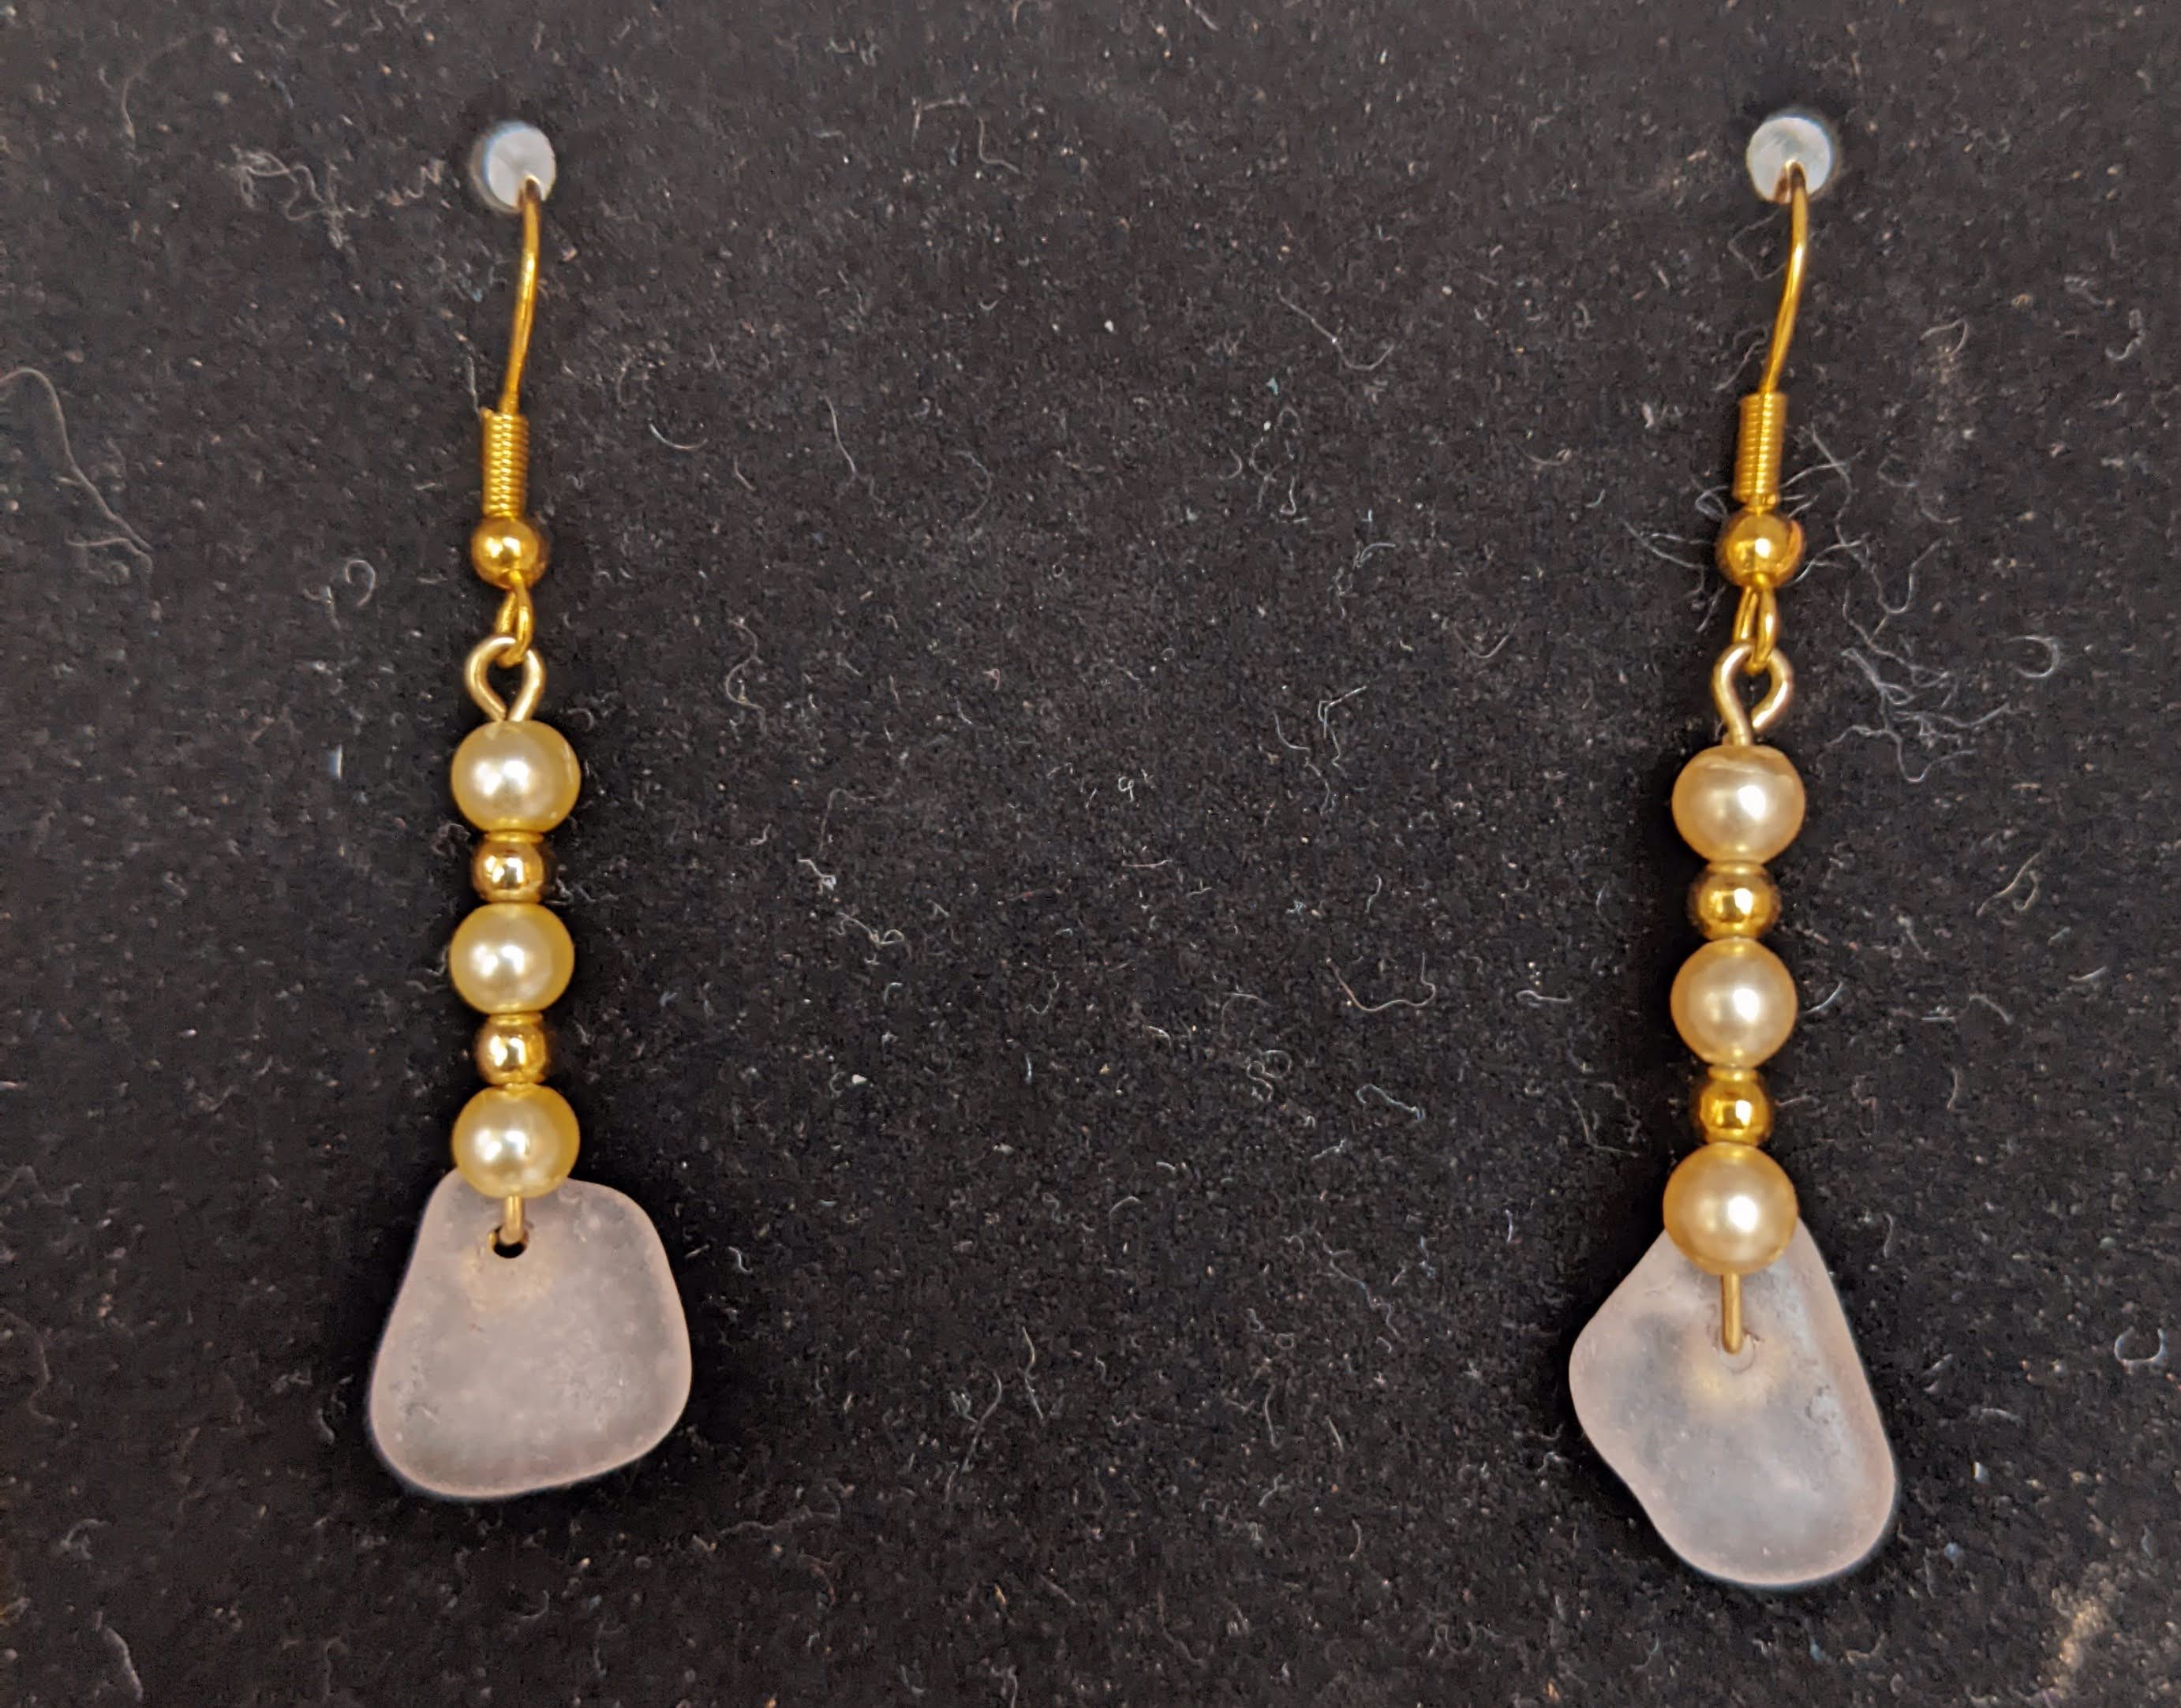 Pale lavender seaglass and pearl and gold beads earrings